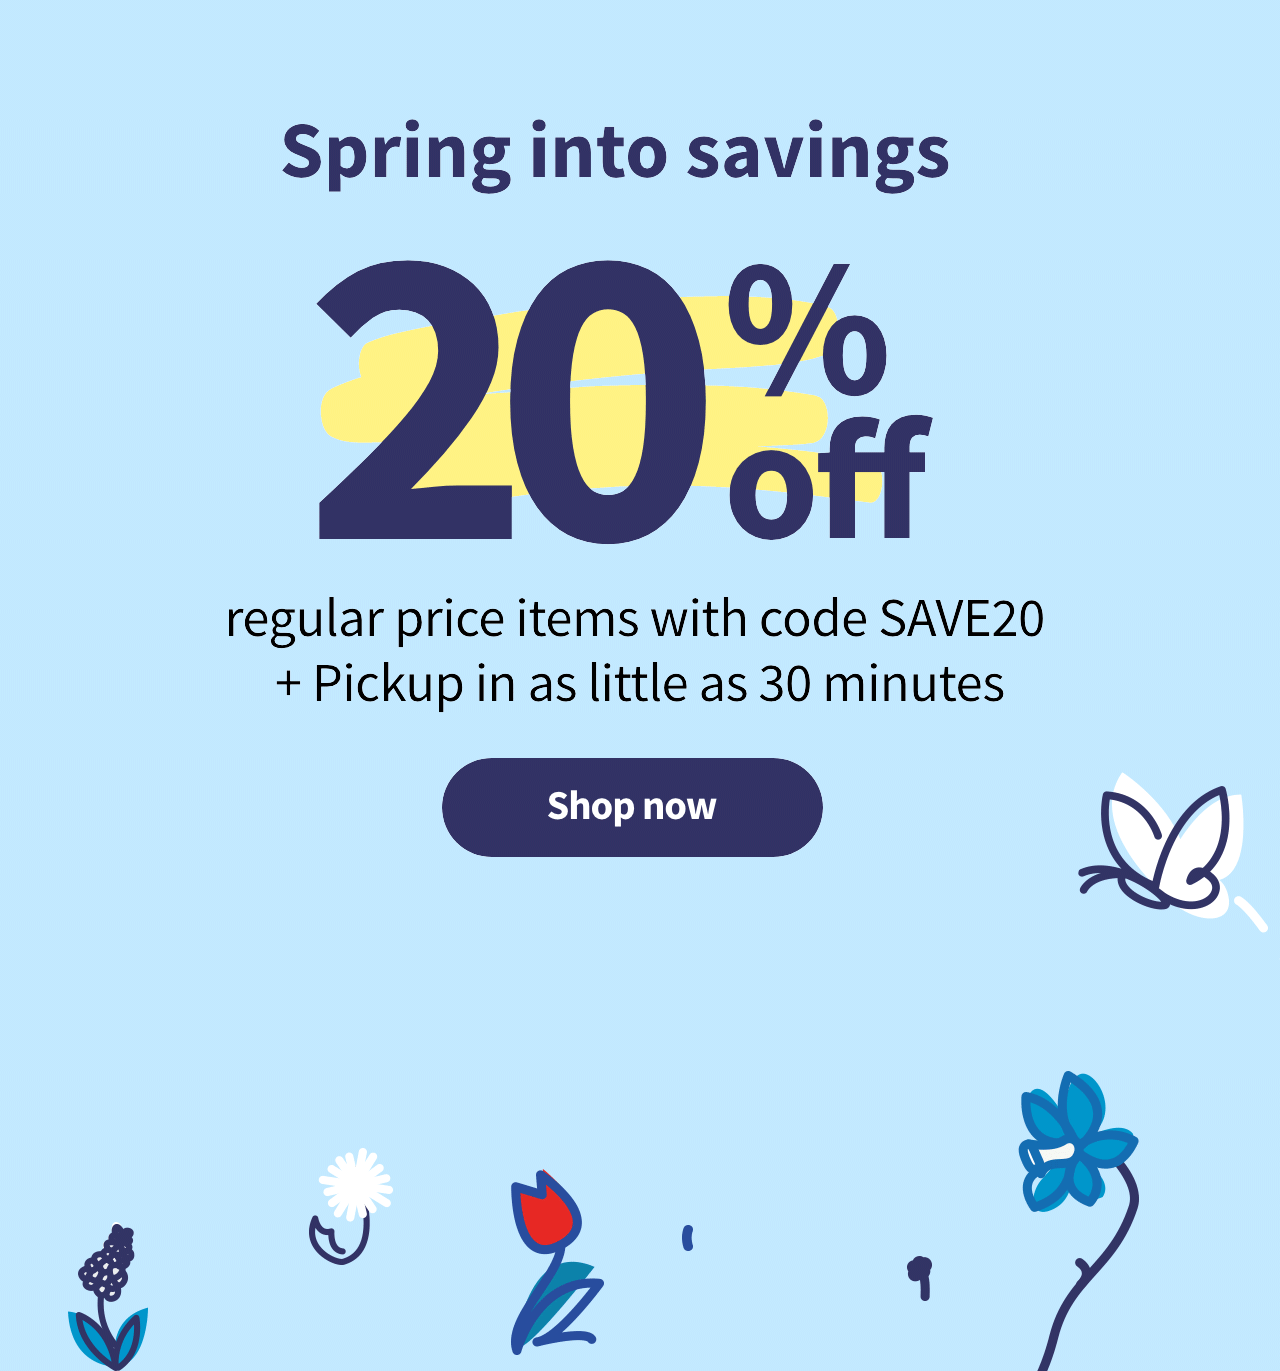 Spring into savings. 20% off regular price items with code SAVE20 + Pickup in as little as 30 minutes. Shop now